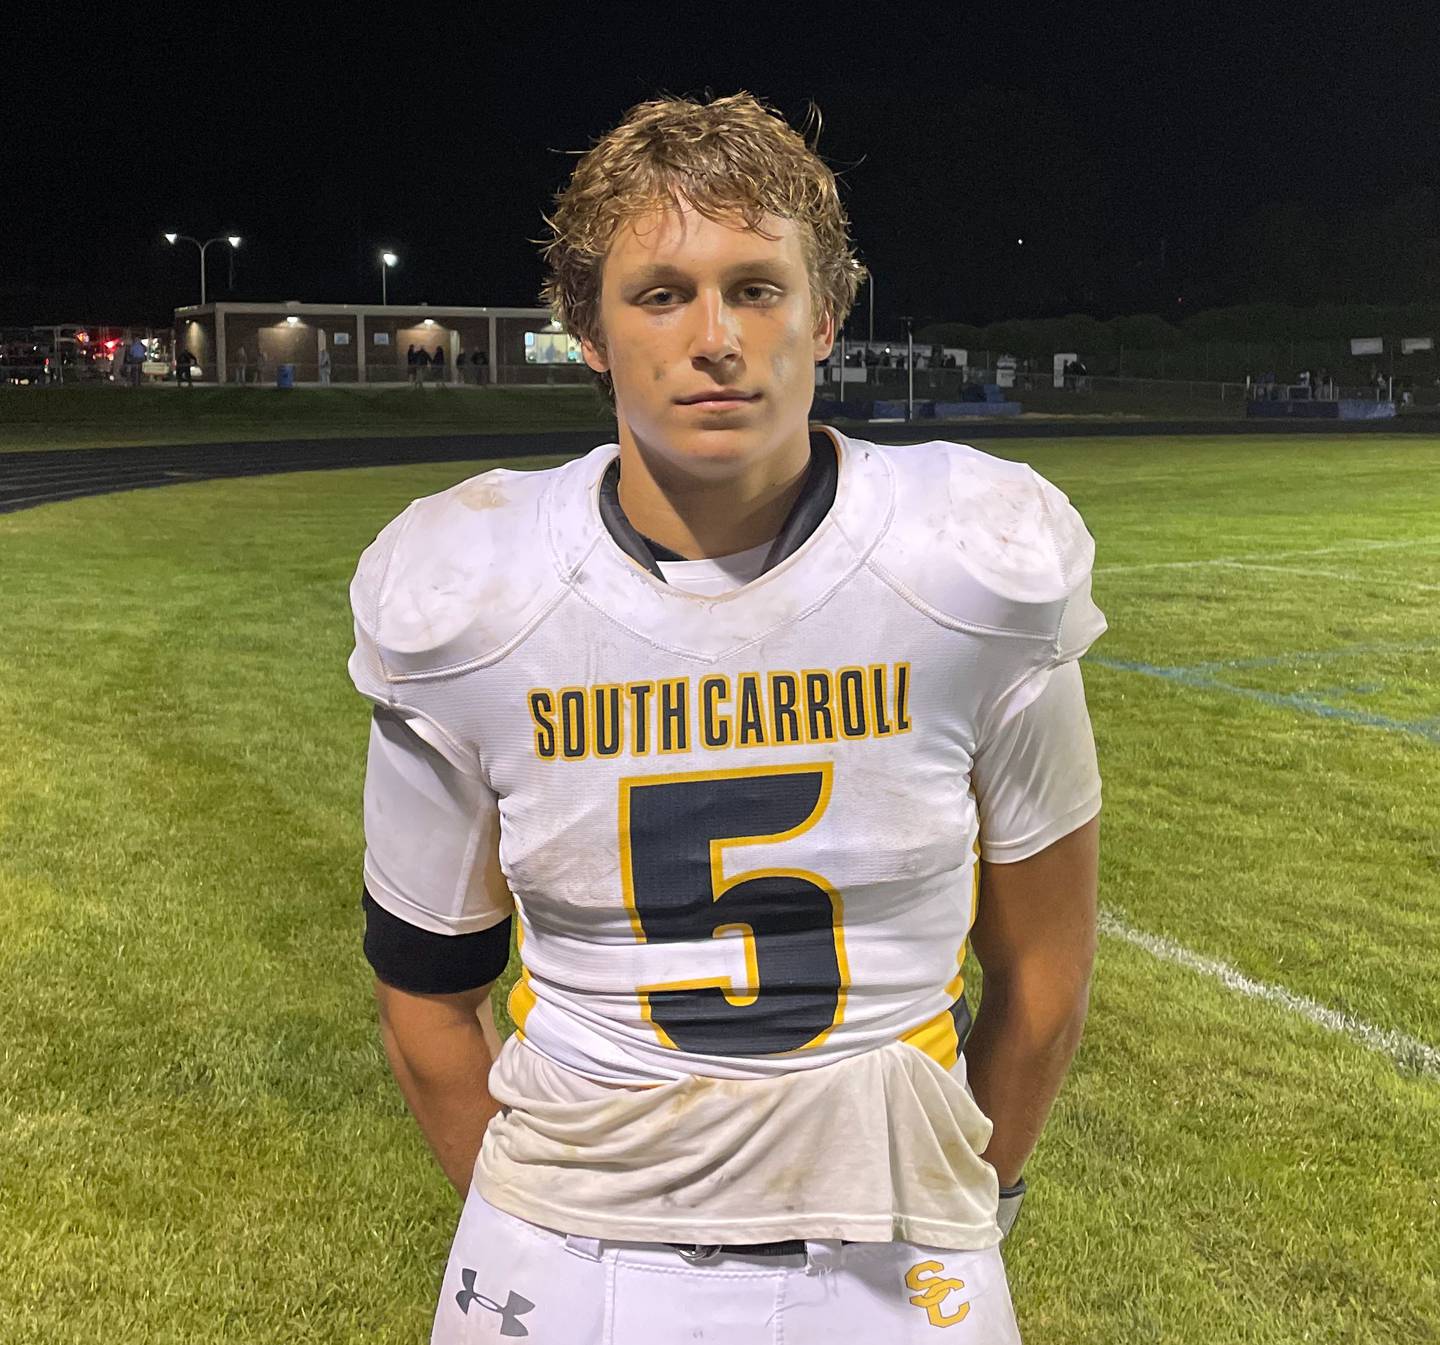 Carter Mazalewski came up big for South Carroll football Friday evening. His touchdown with 4 minutes, 21 seconds left in regulation gave the Cavaliers a 24-21 victory over Westminster in the Carroll County Athletic League opener for both..